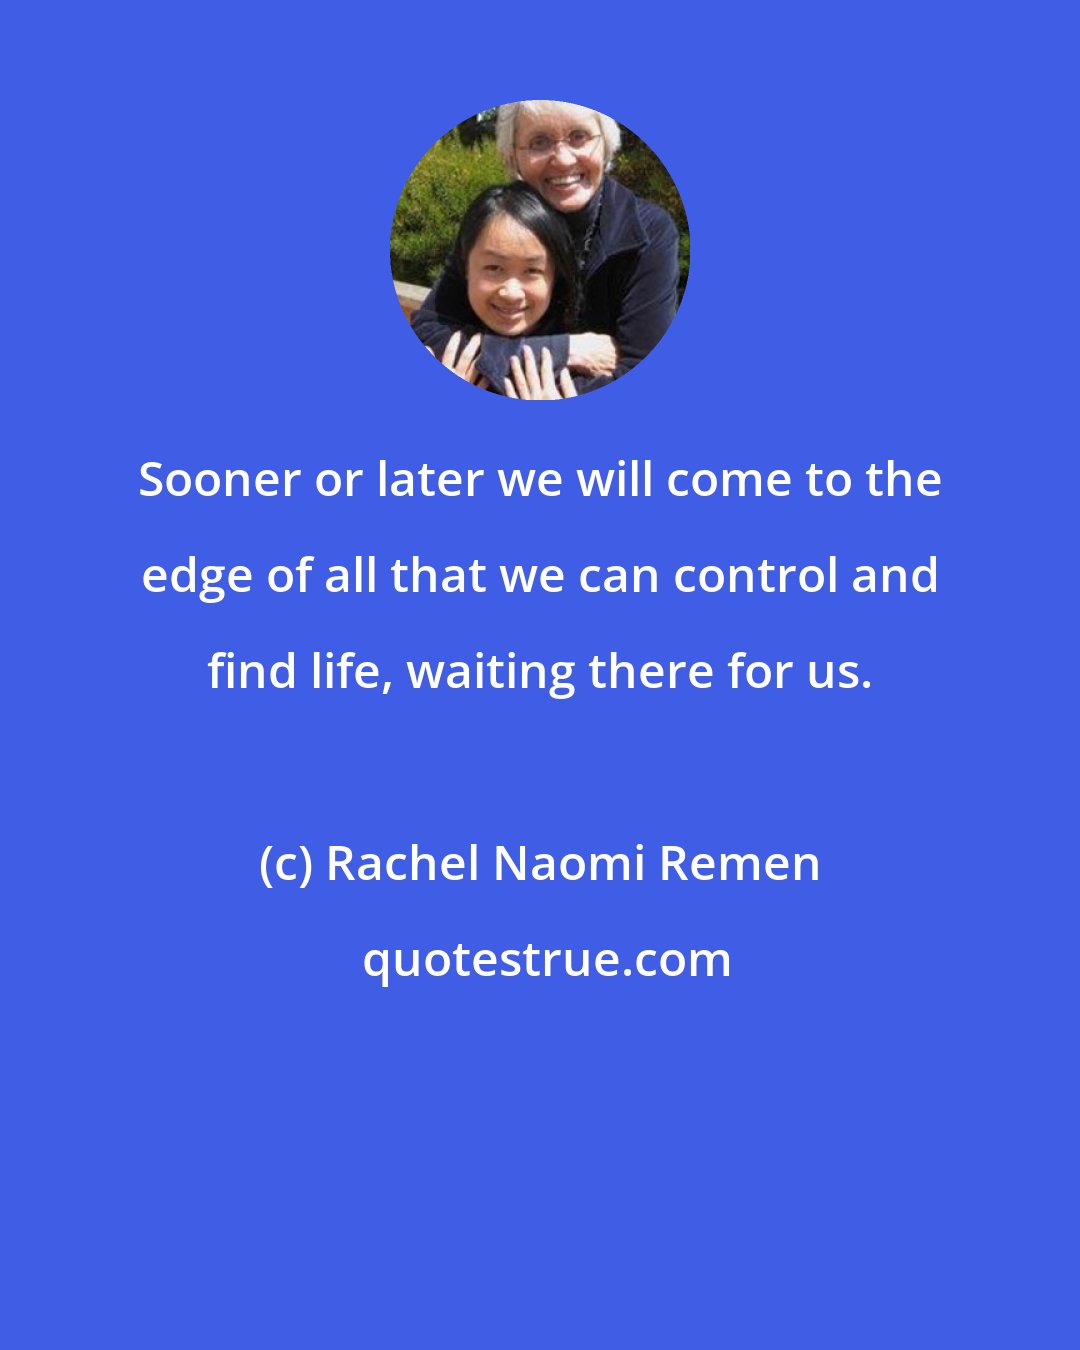 Rachel Naomi Remen: Sooner or later we will come to the edge of all that we can control and find life, waiting there for us.